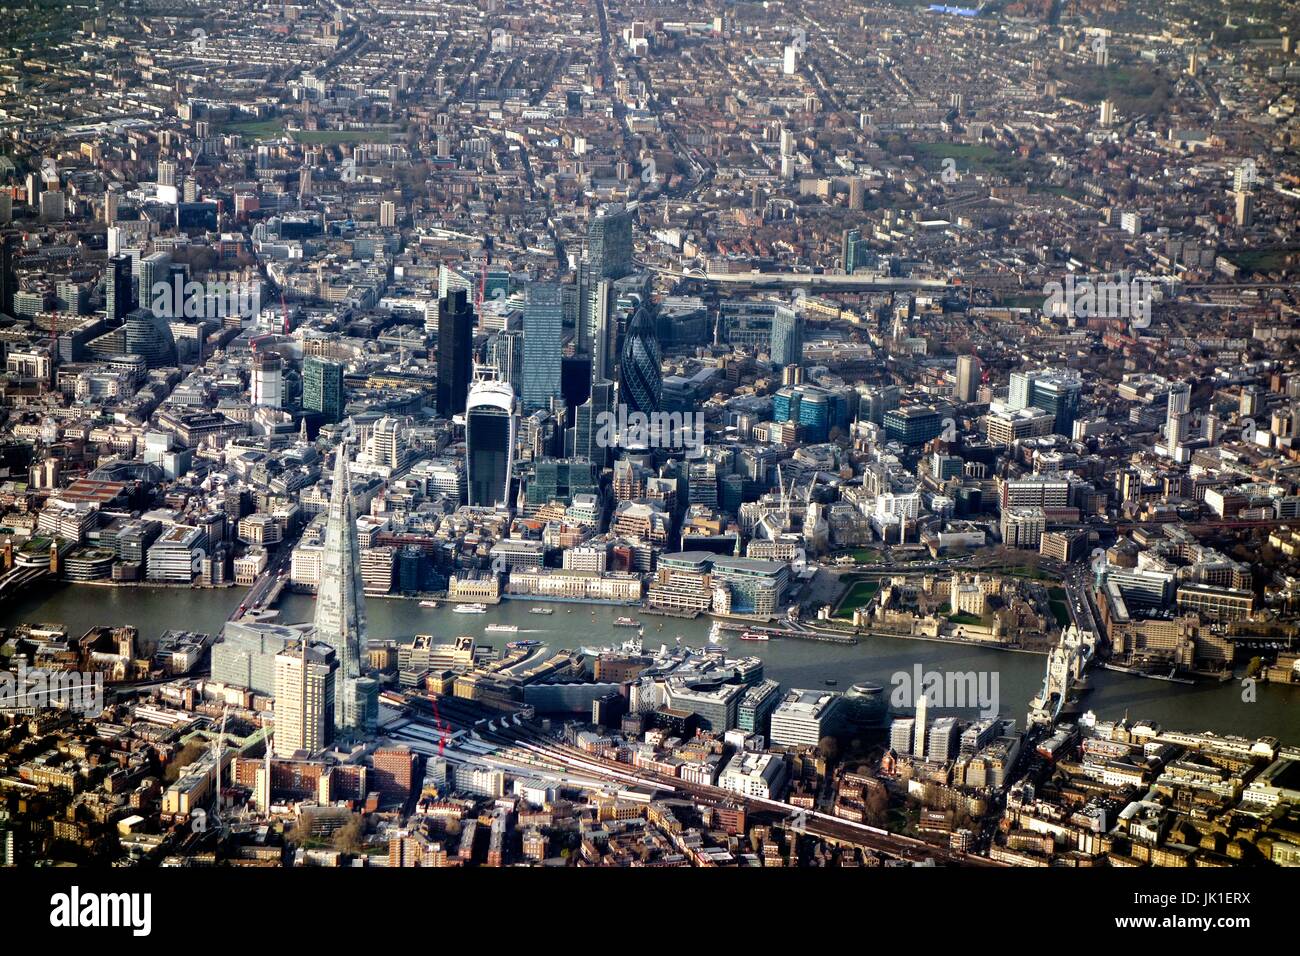 Central London from the air Stock Photo